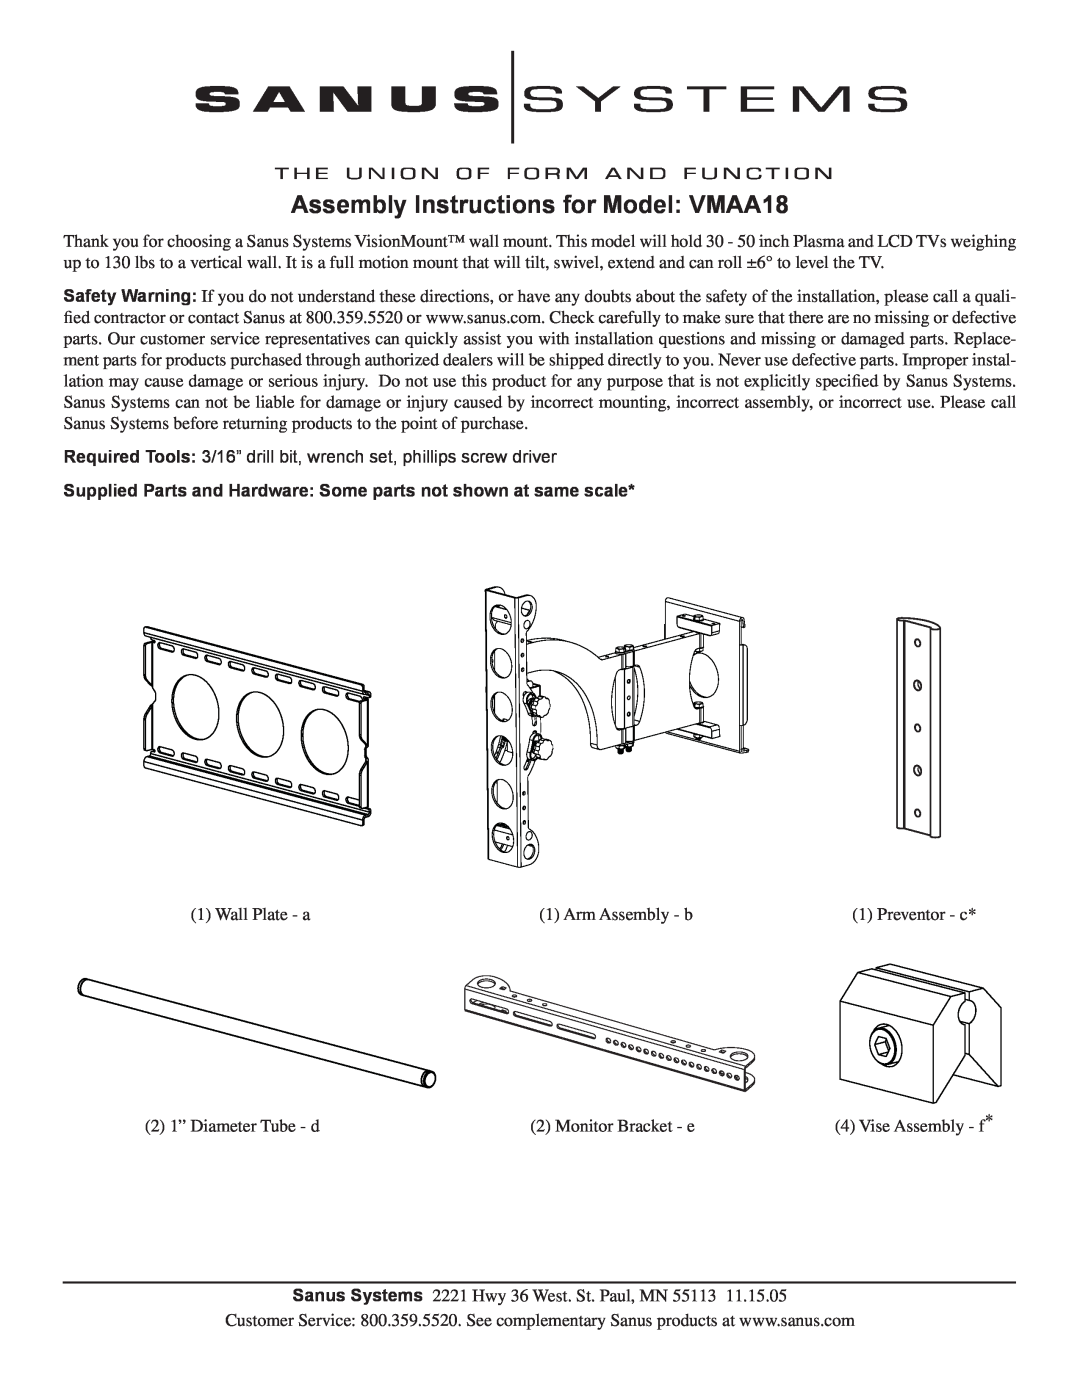 Sanus Systems manual Assembly Instructions for Model VMAA18 